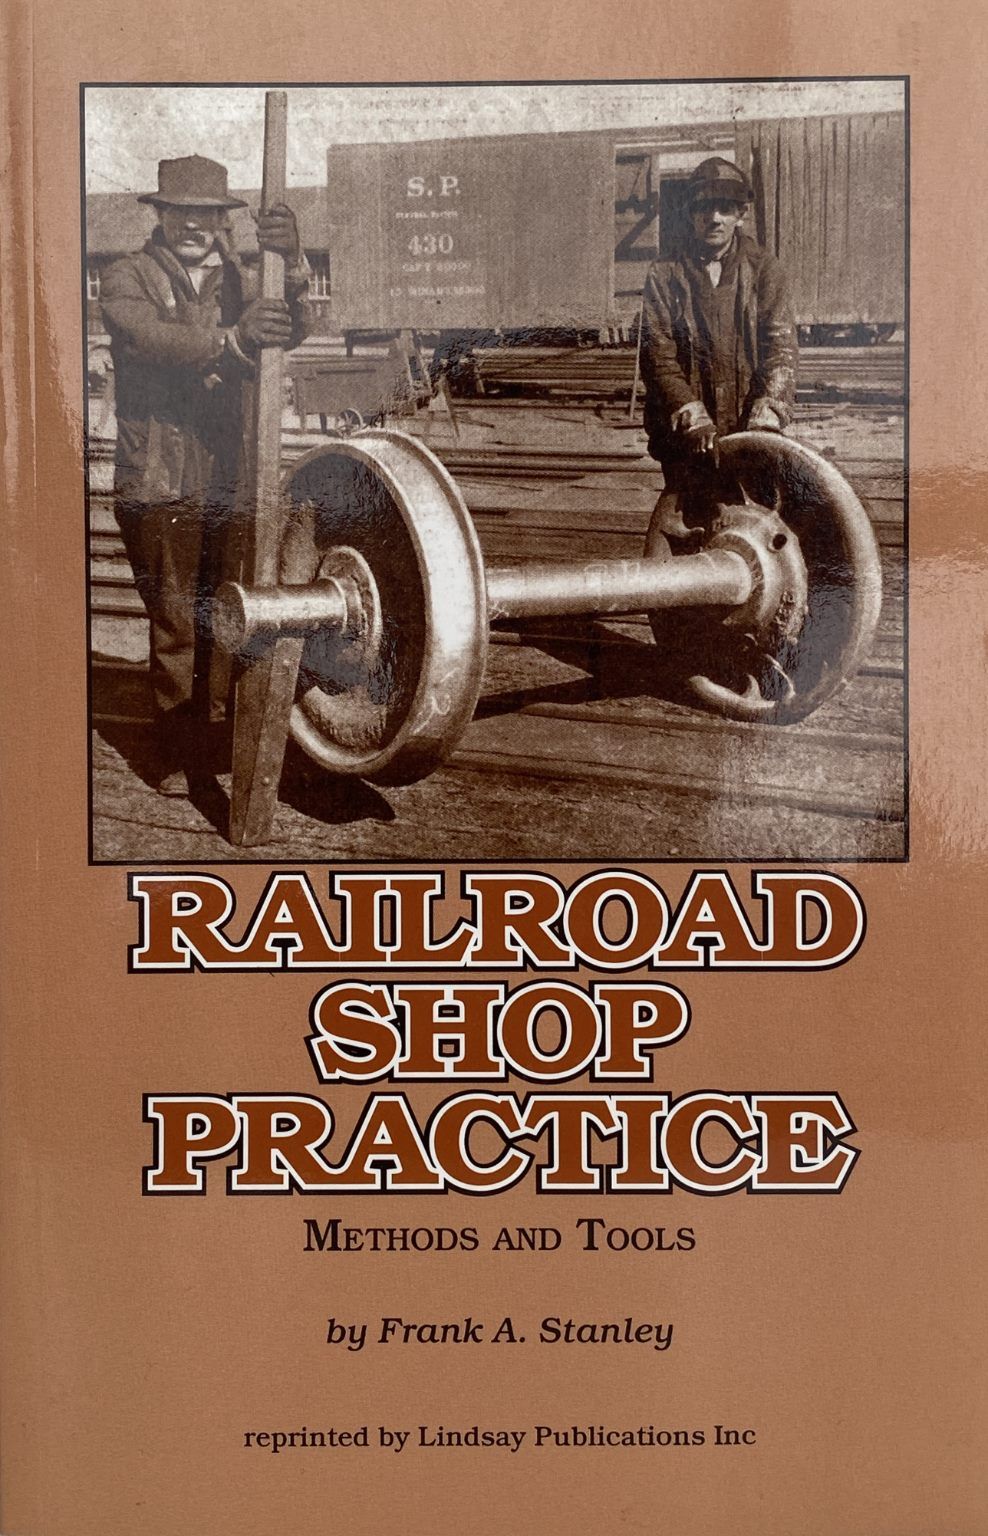 RAILROAD SHOP PRACTICE: Methods and Tools